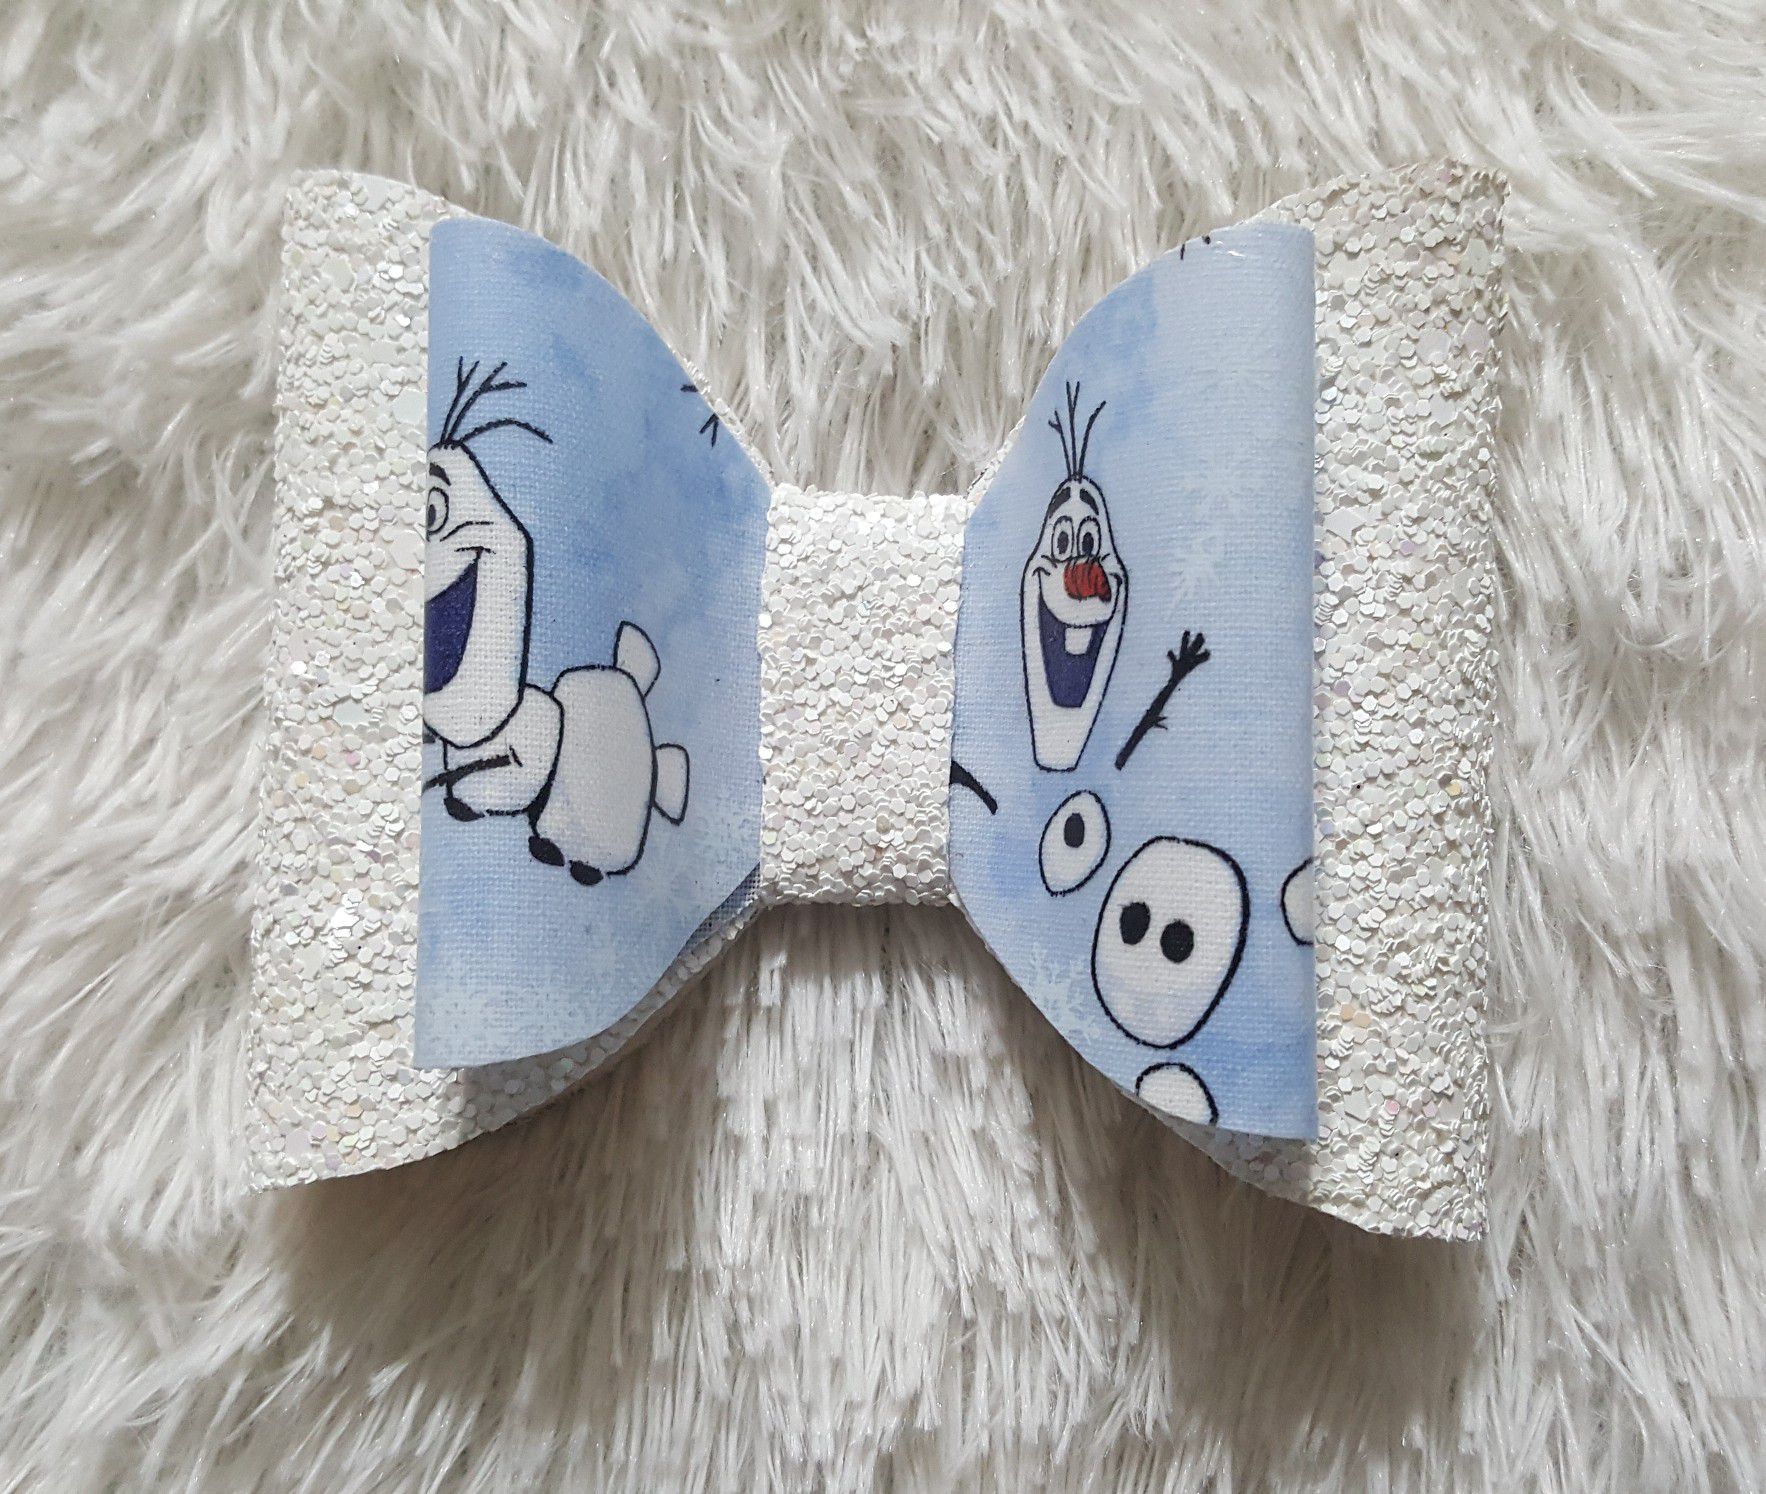 Frozen inspired Bows